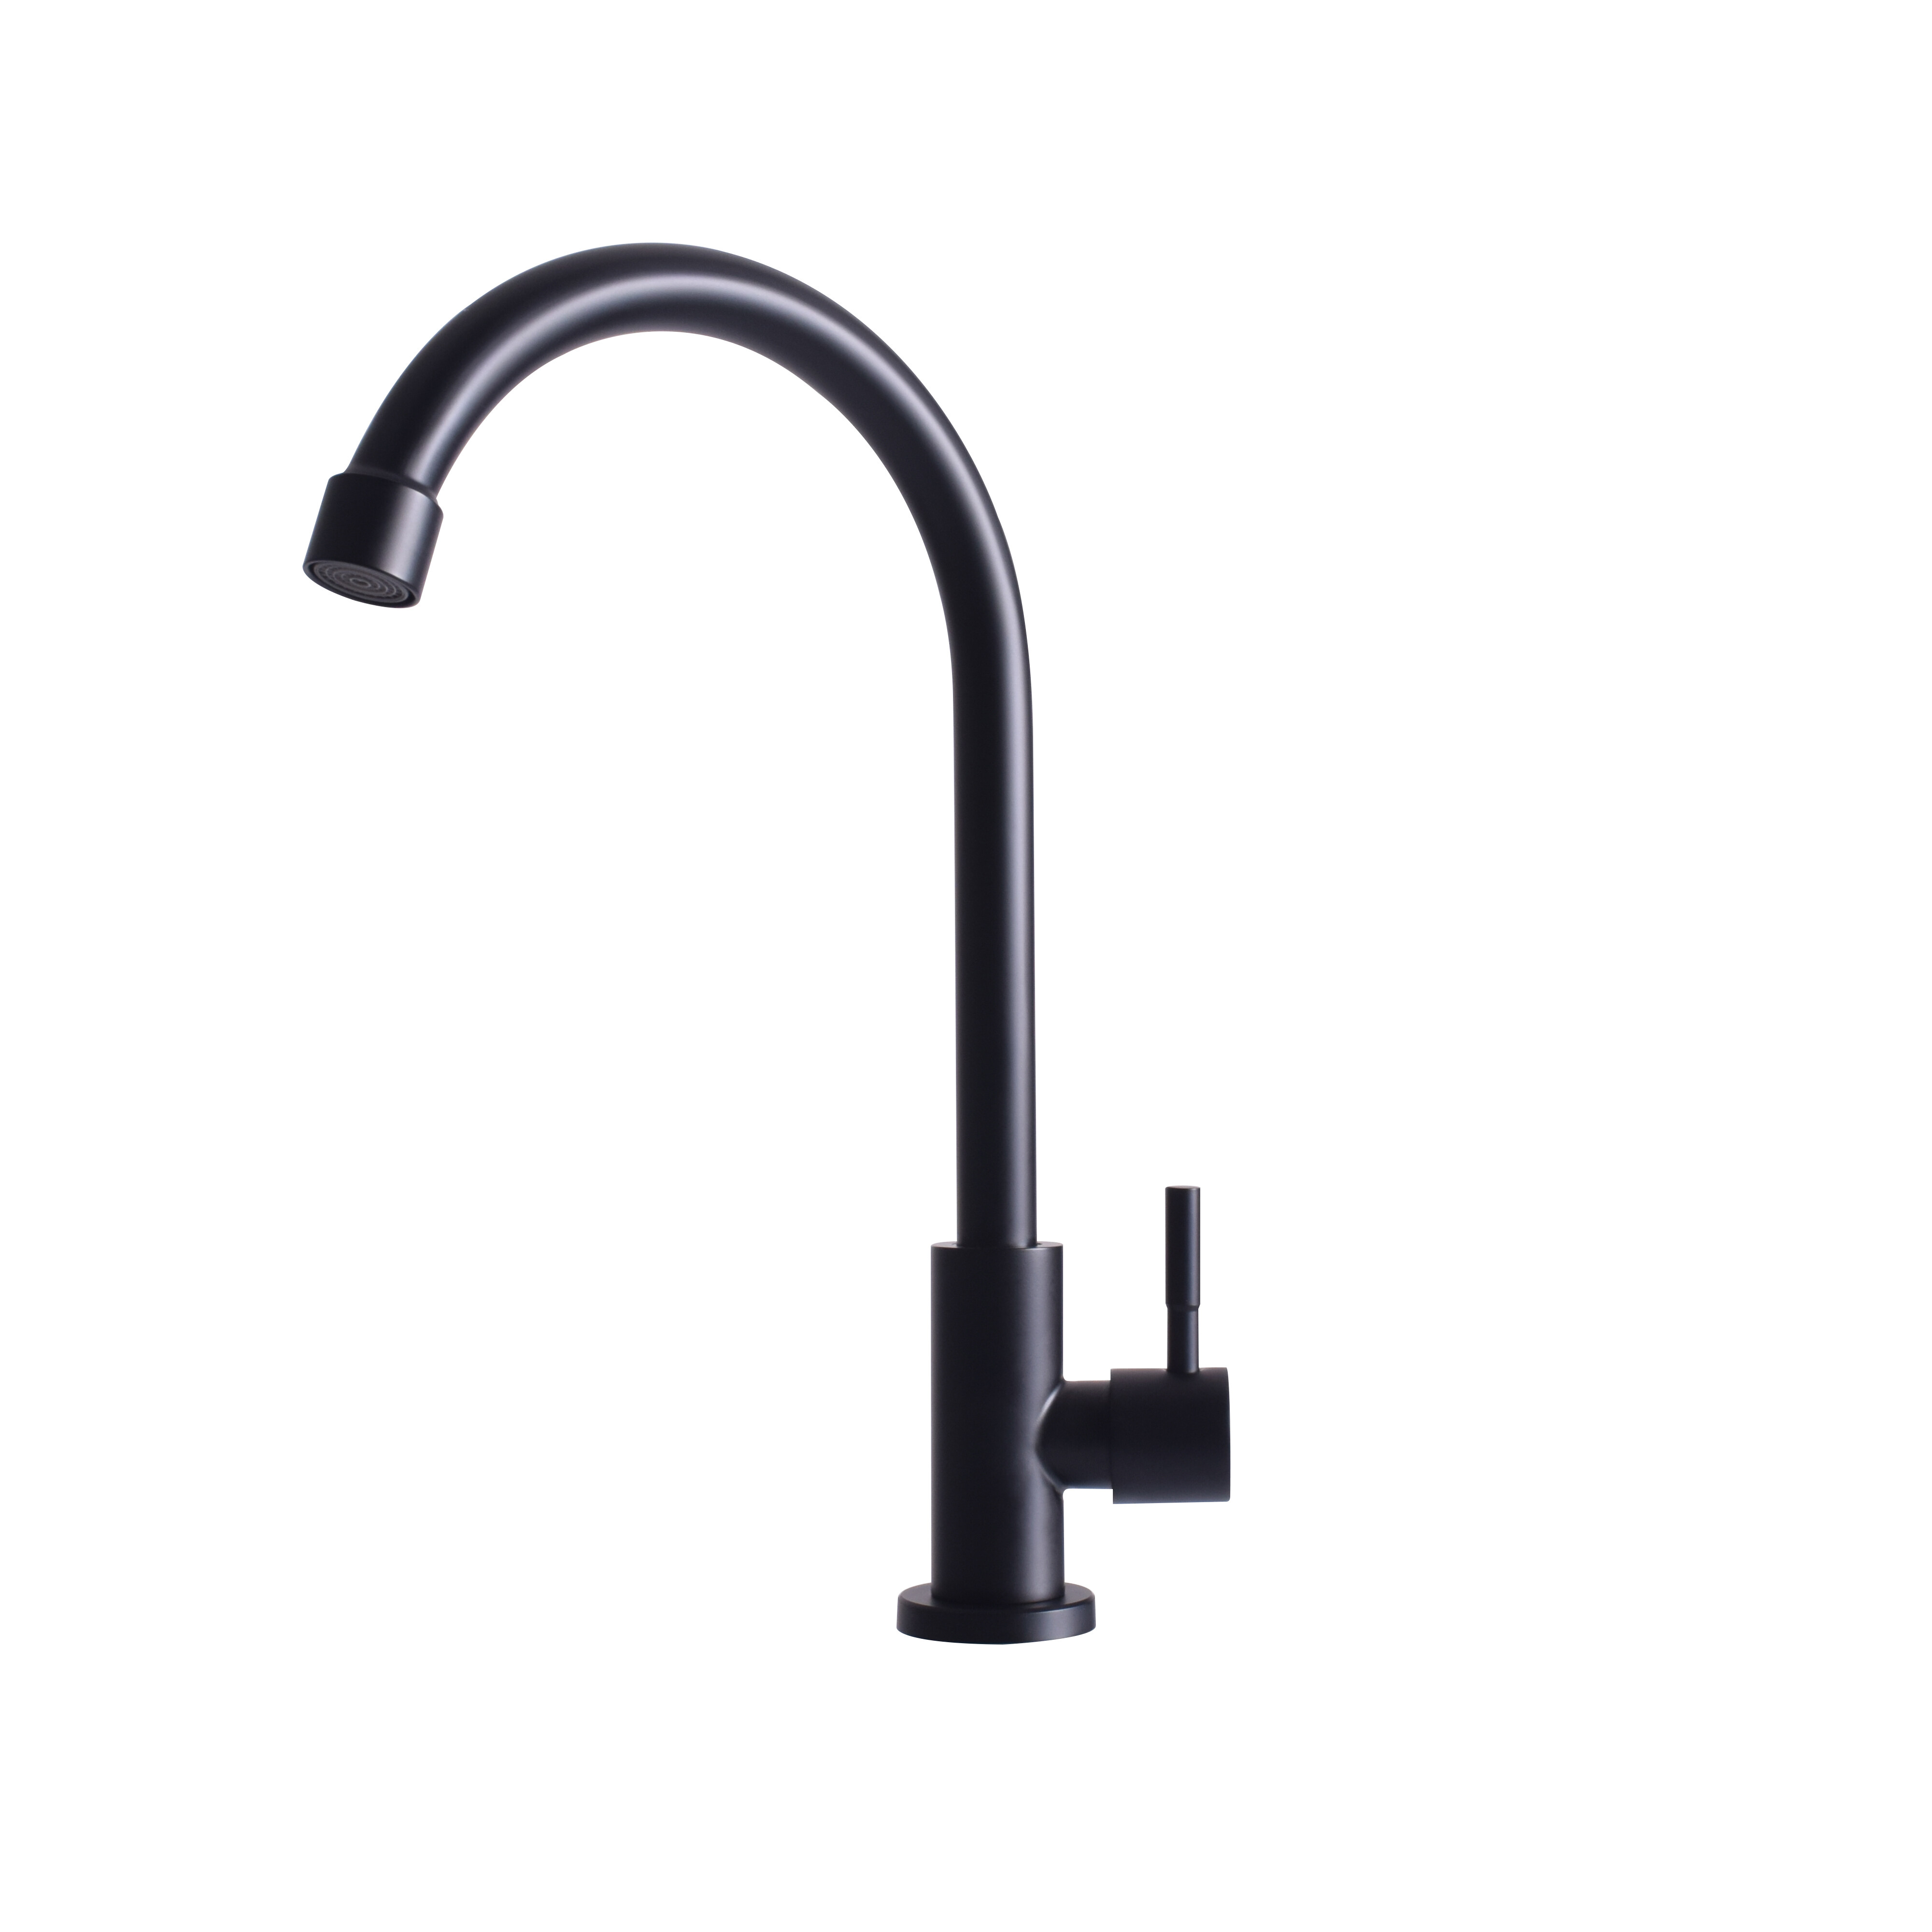 We have a custom black shower head and mixer for sale, for more information, please kindly contact us at any time. If you also have an interest in outdoor shower fixtures, we are glad to answer for you.